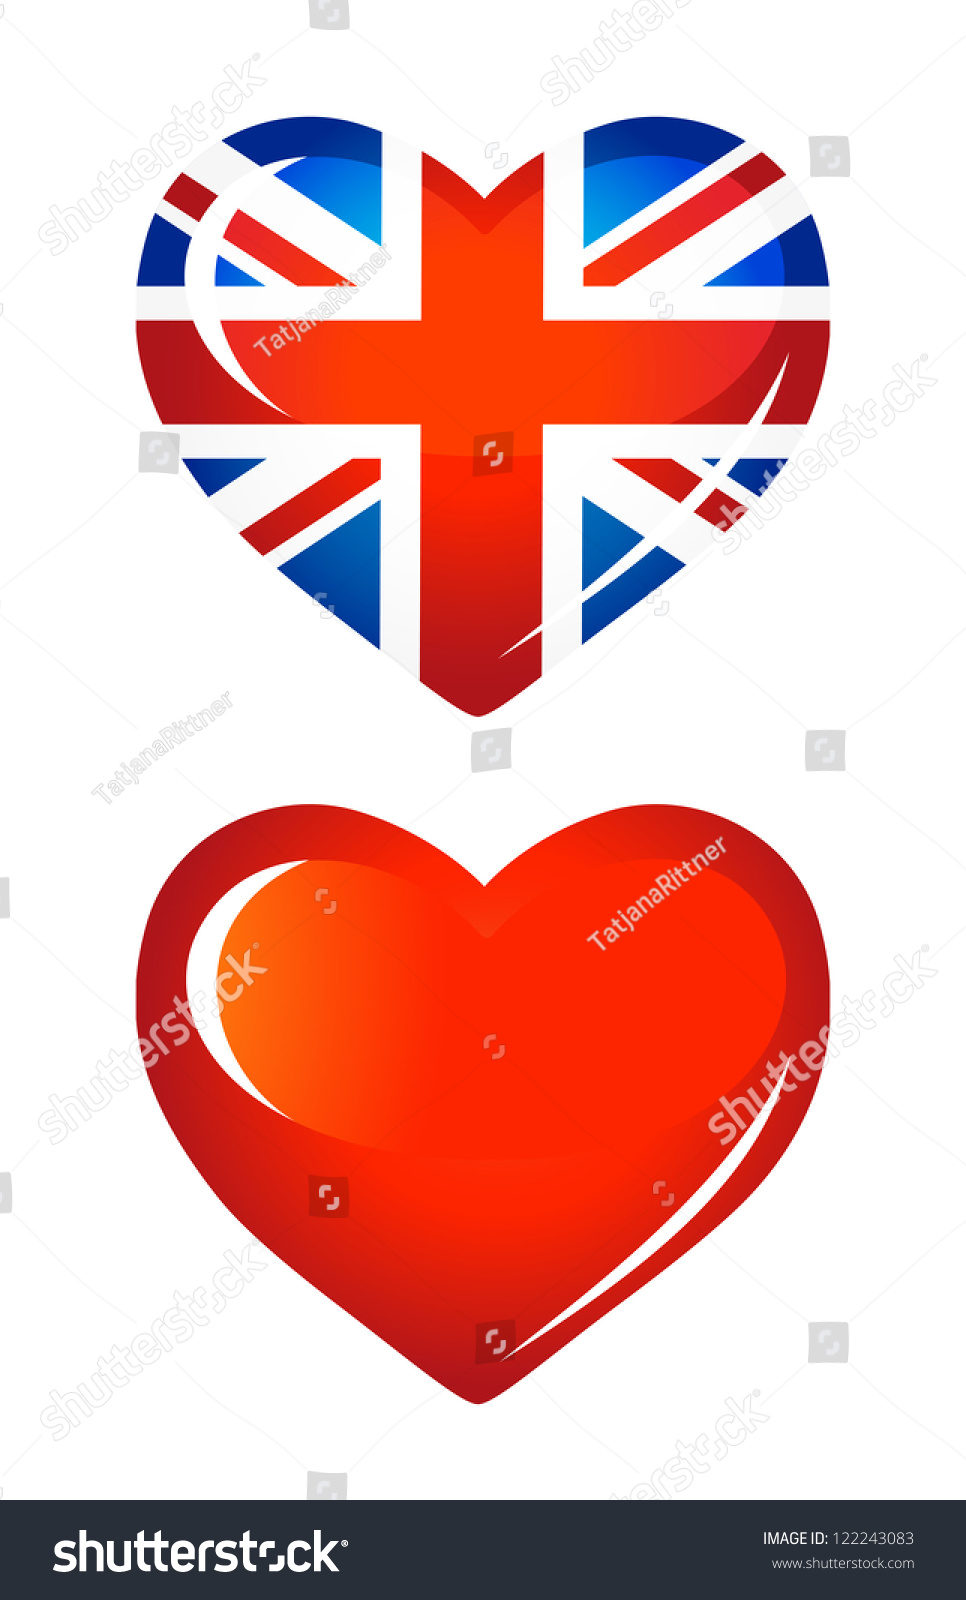 SVG of Country UK flag as Heart icon svg